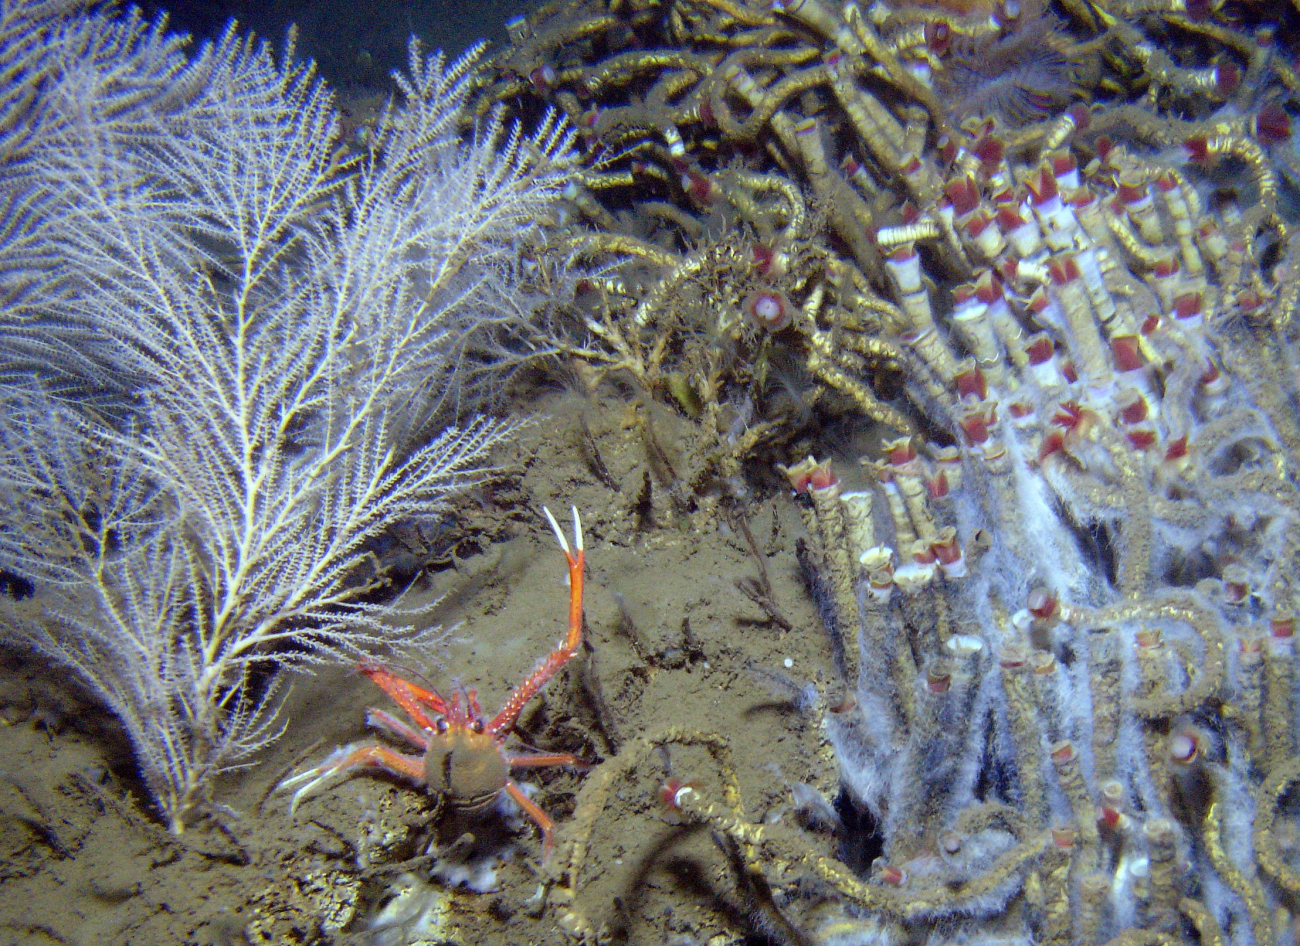 An example of the Mississippi Canyon 751 site where coral and coldseep habitats intersect